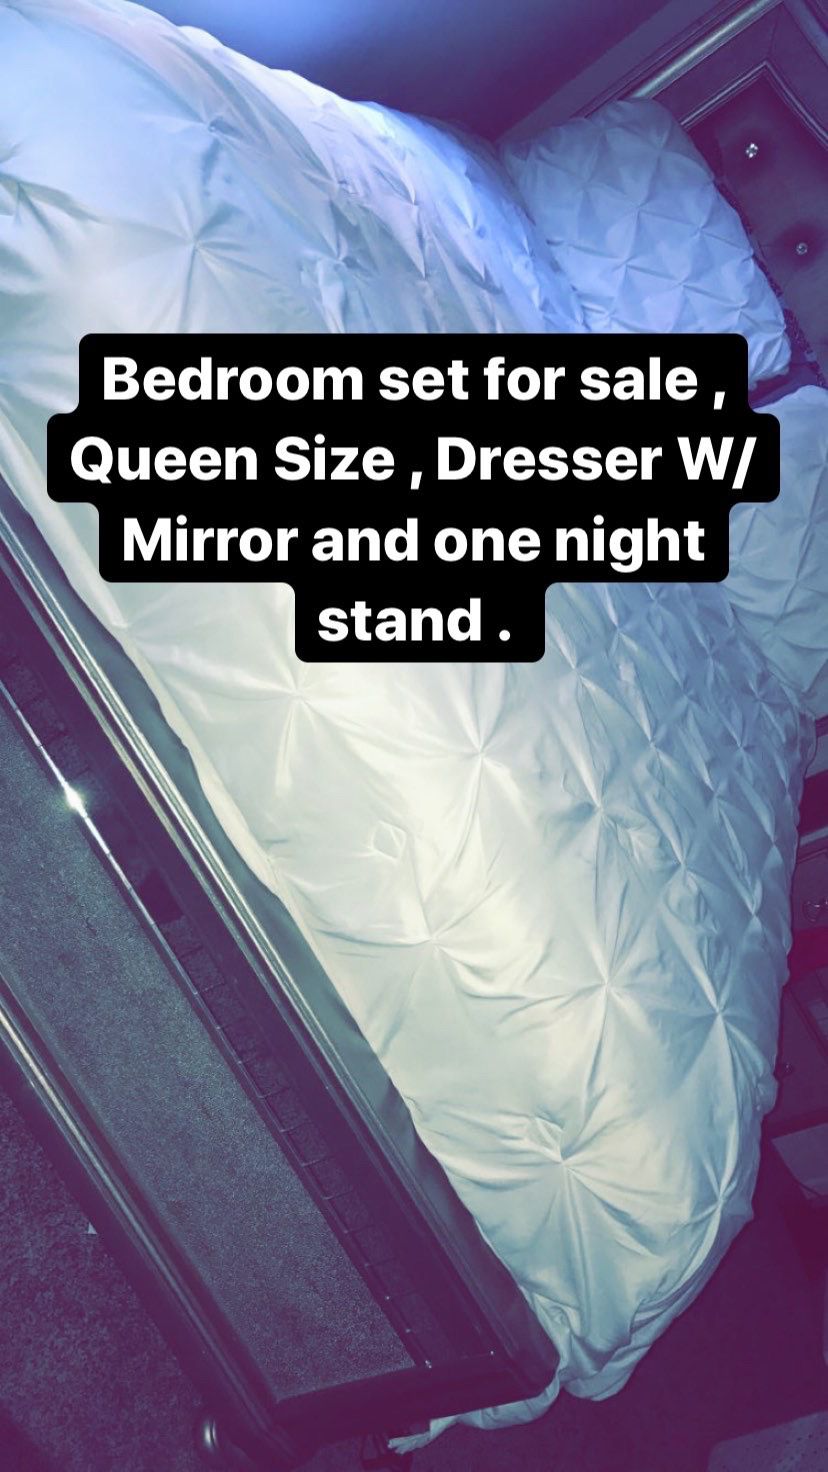 Queen size bedroom set . Dresser with mirror and one night stand .